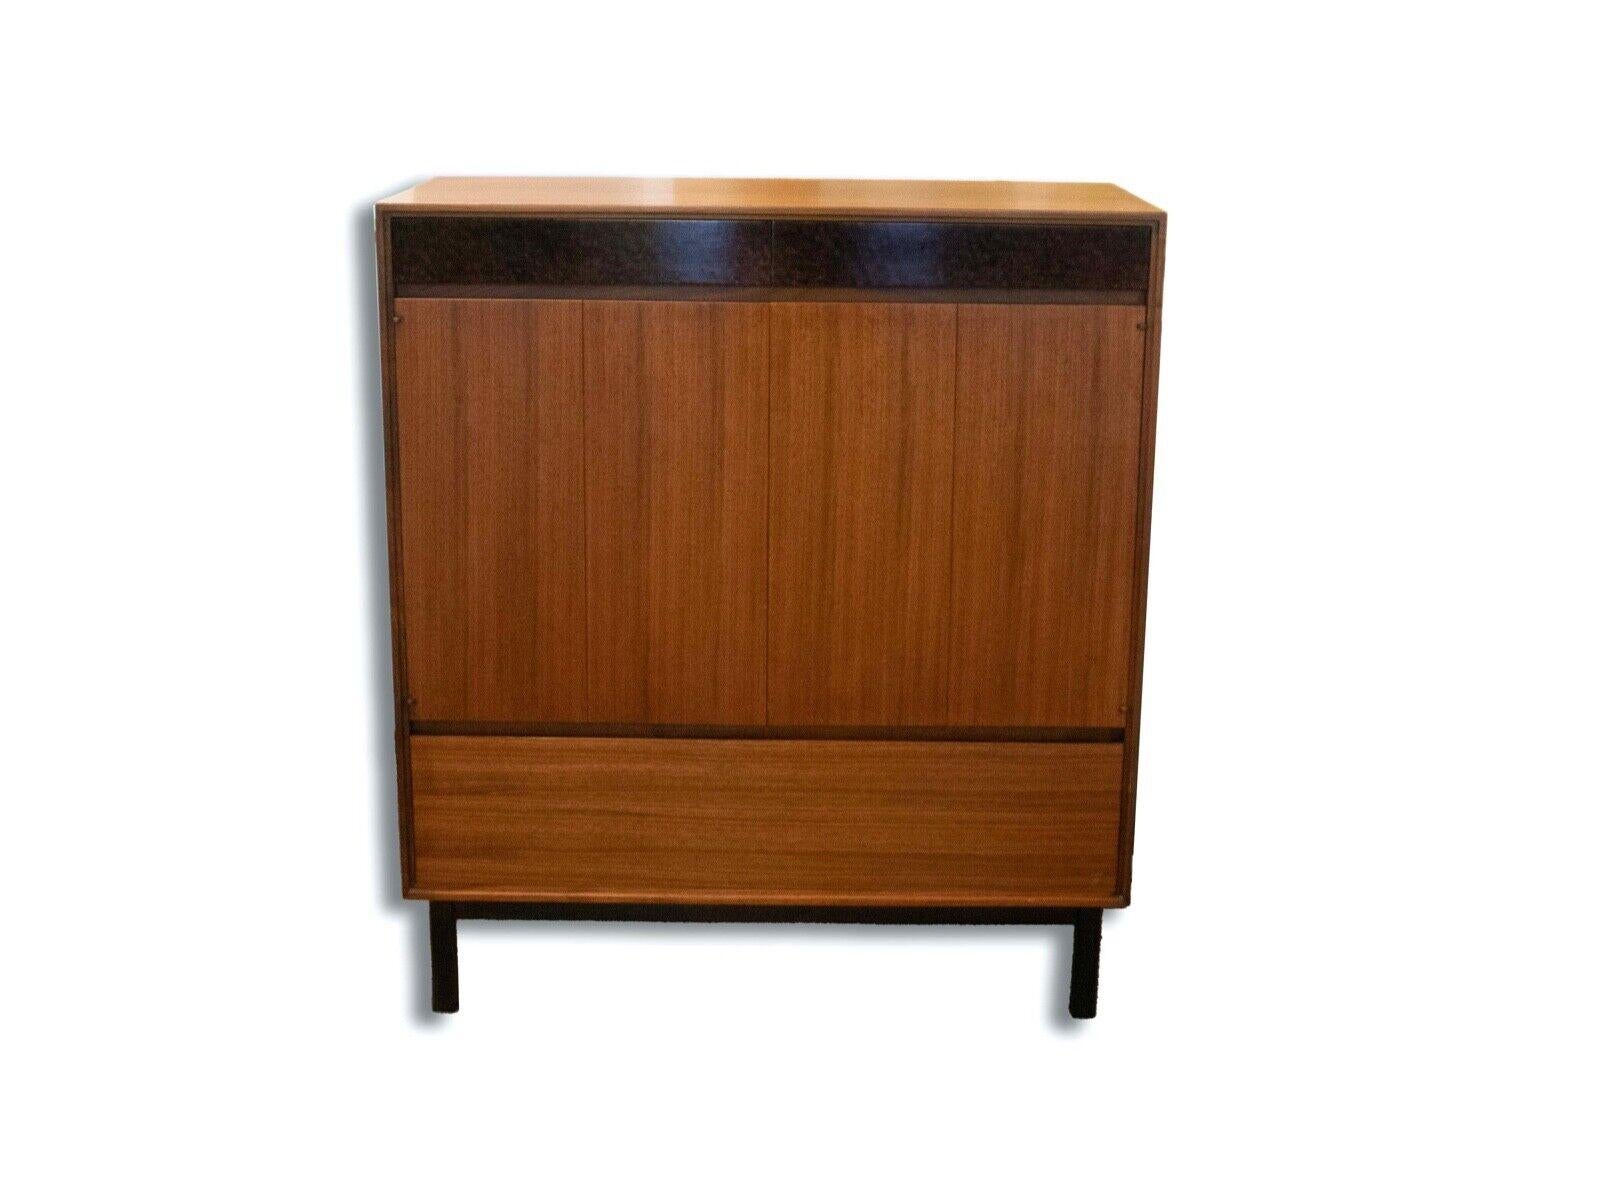 Introduce elegance and practicality to your bedroom with the Mount Airy Walnut Hi-Boy. This exquisite piece of furniture combines the beauty of walnut wood with a tall and slender design. The rich walnut finish adds warmth and sophistication to any